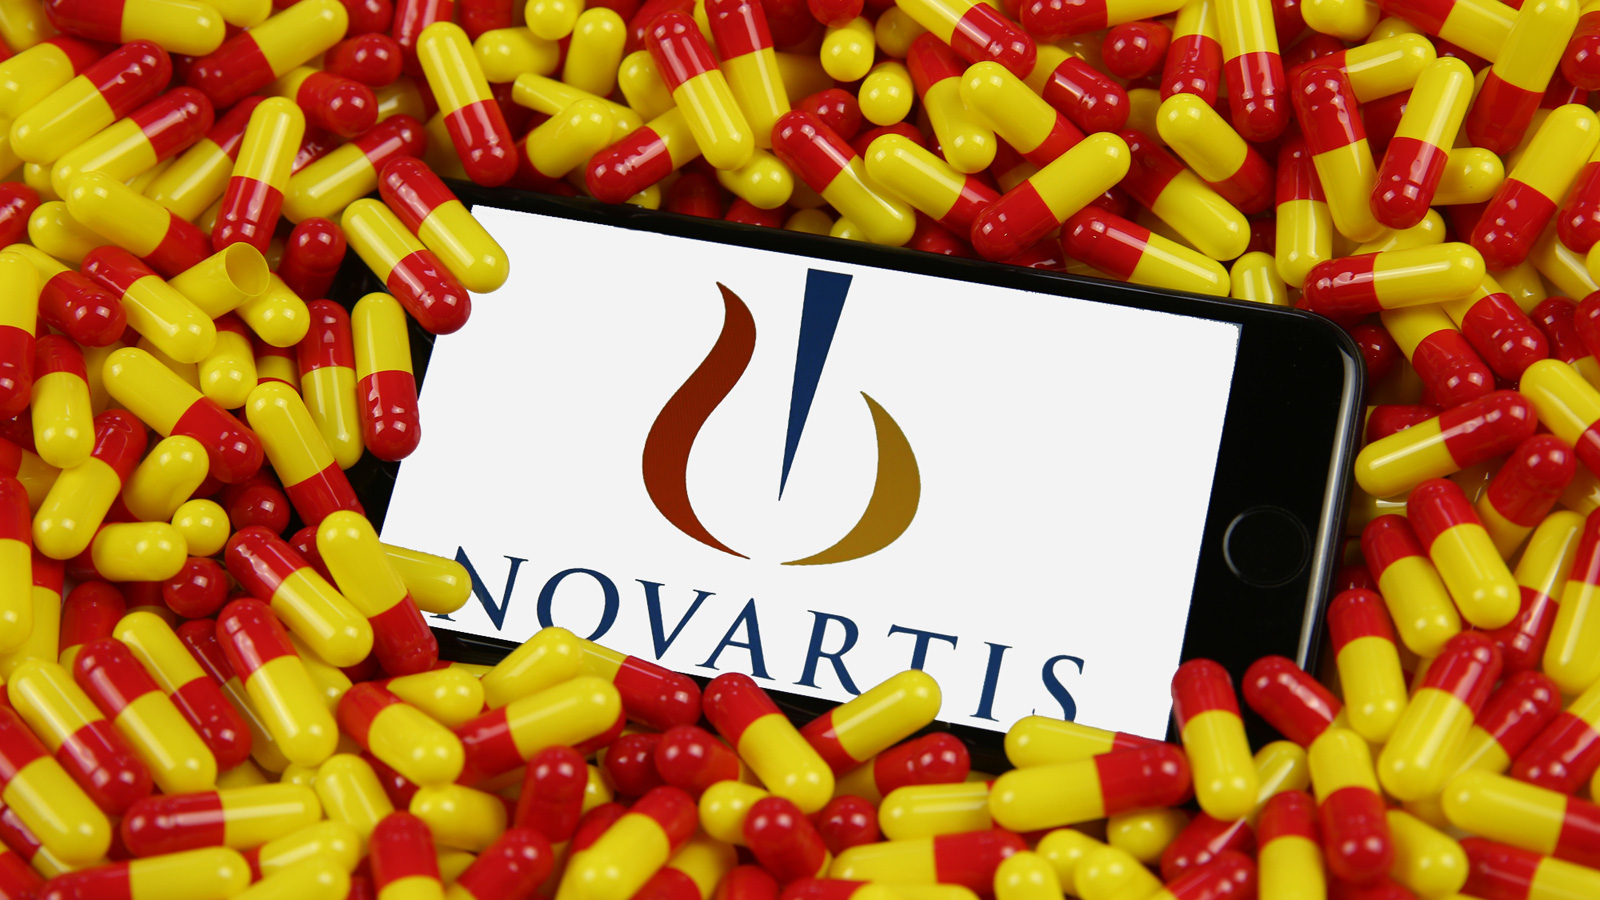 Novartis logon on a phone in a bed of pills